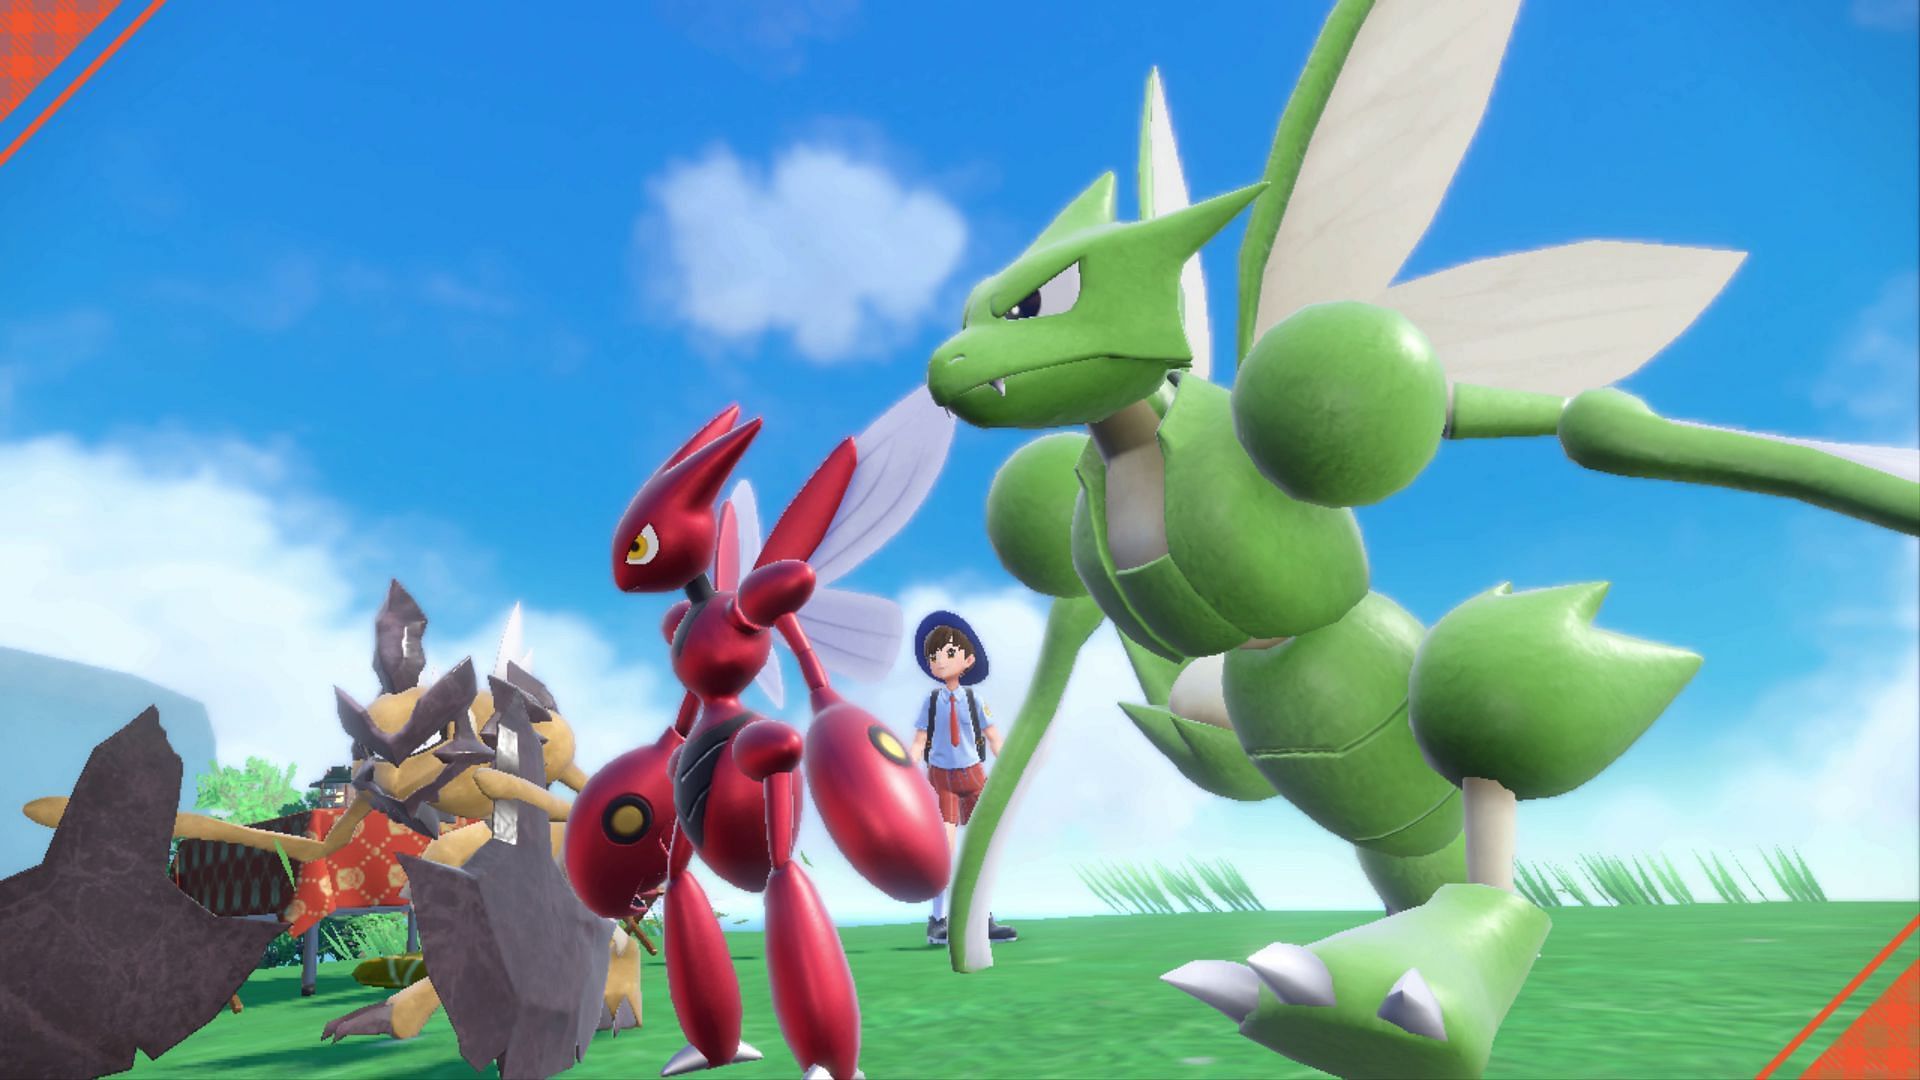 Bug-types about to start a battle in Pokemon Scarlet and Violet (Image via Nintendo)